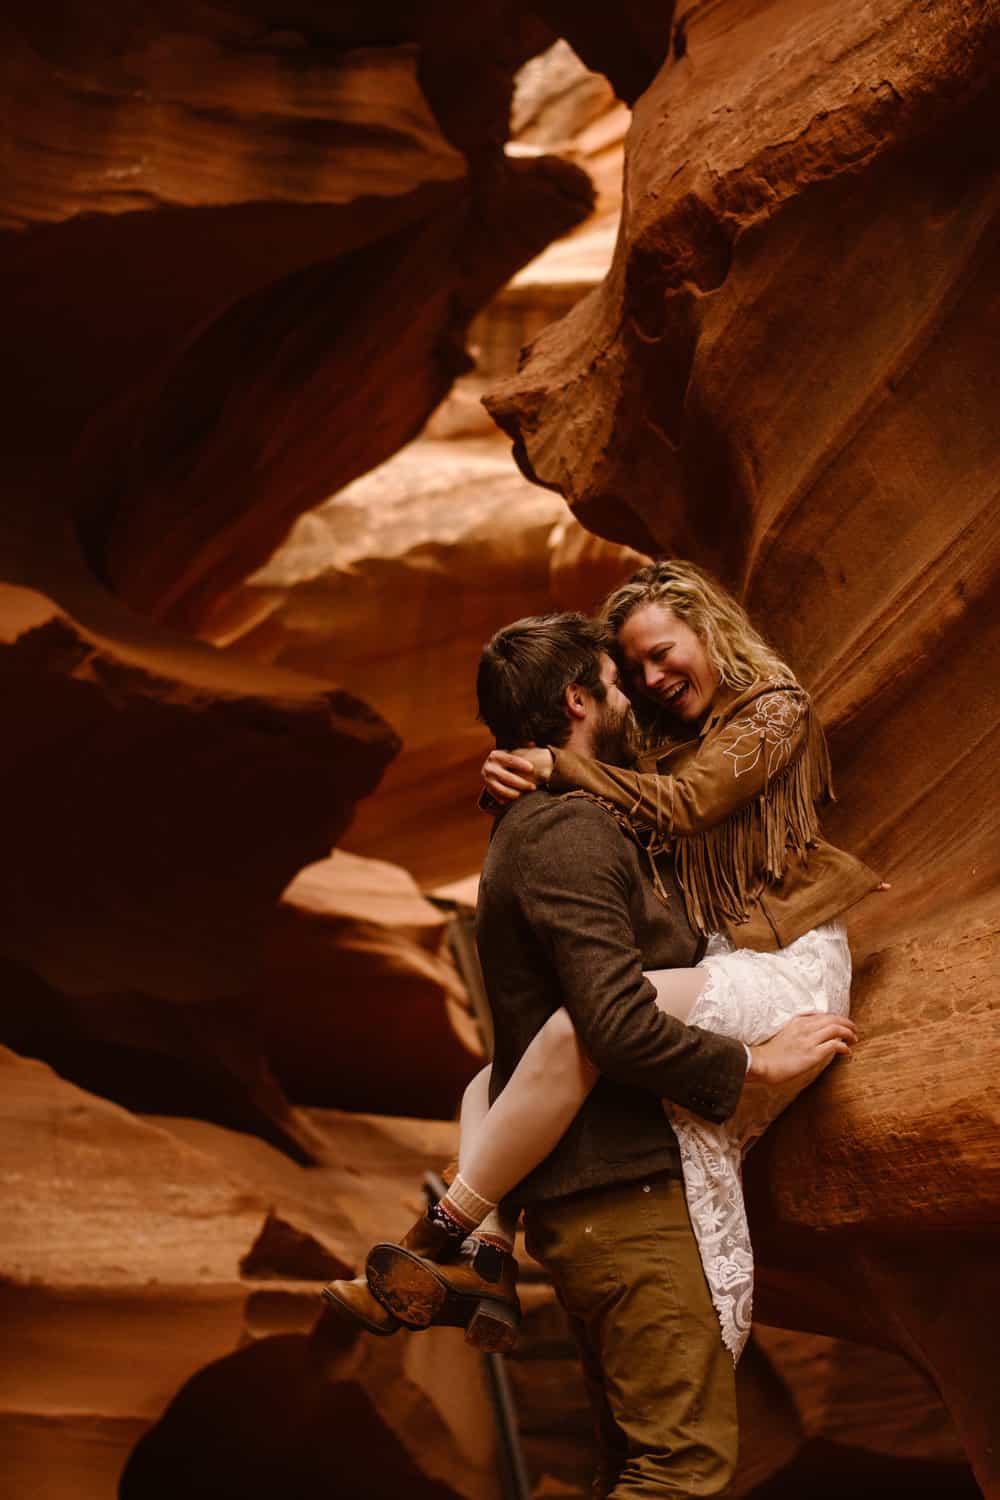 A groom holds his bride agains the slot canyon wallks as she laughs.